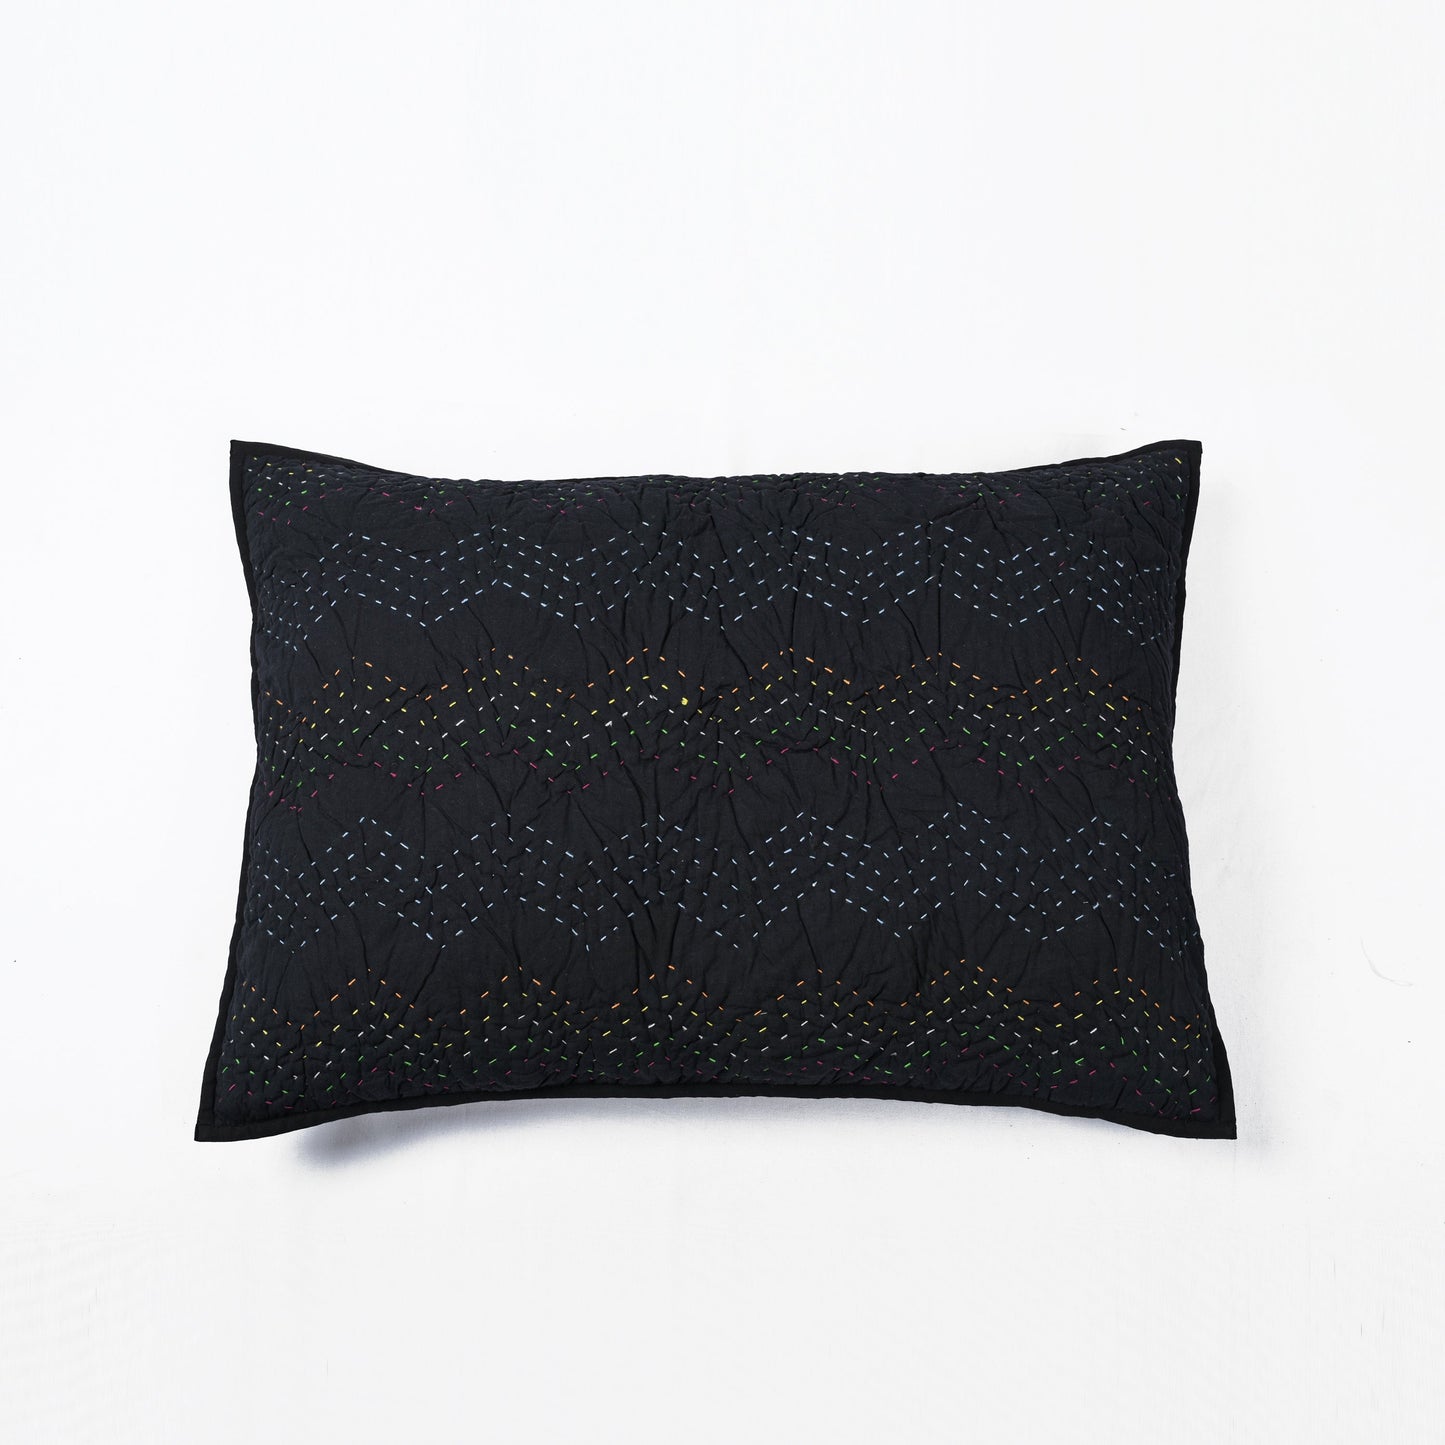 PILLOW SHAM KANTHA - Black colour with chevron pattern quilting - sizes available